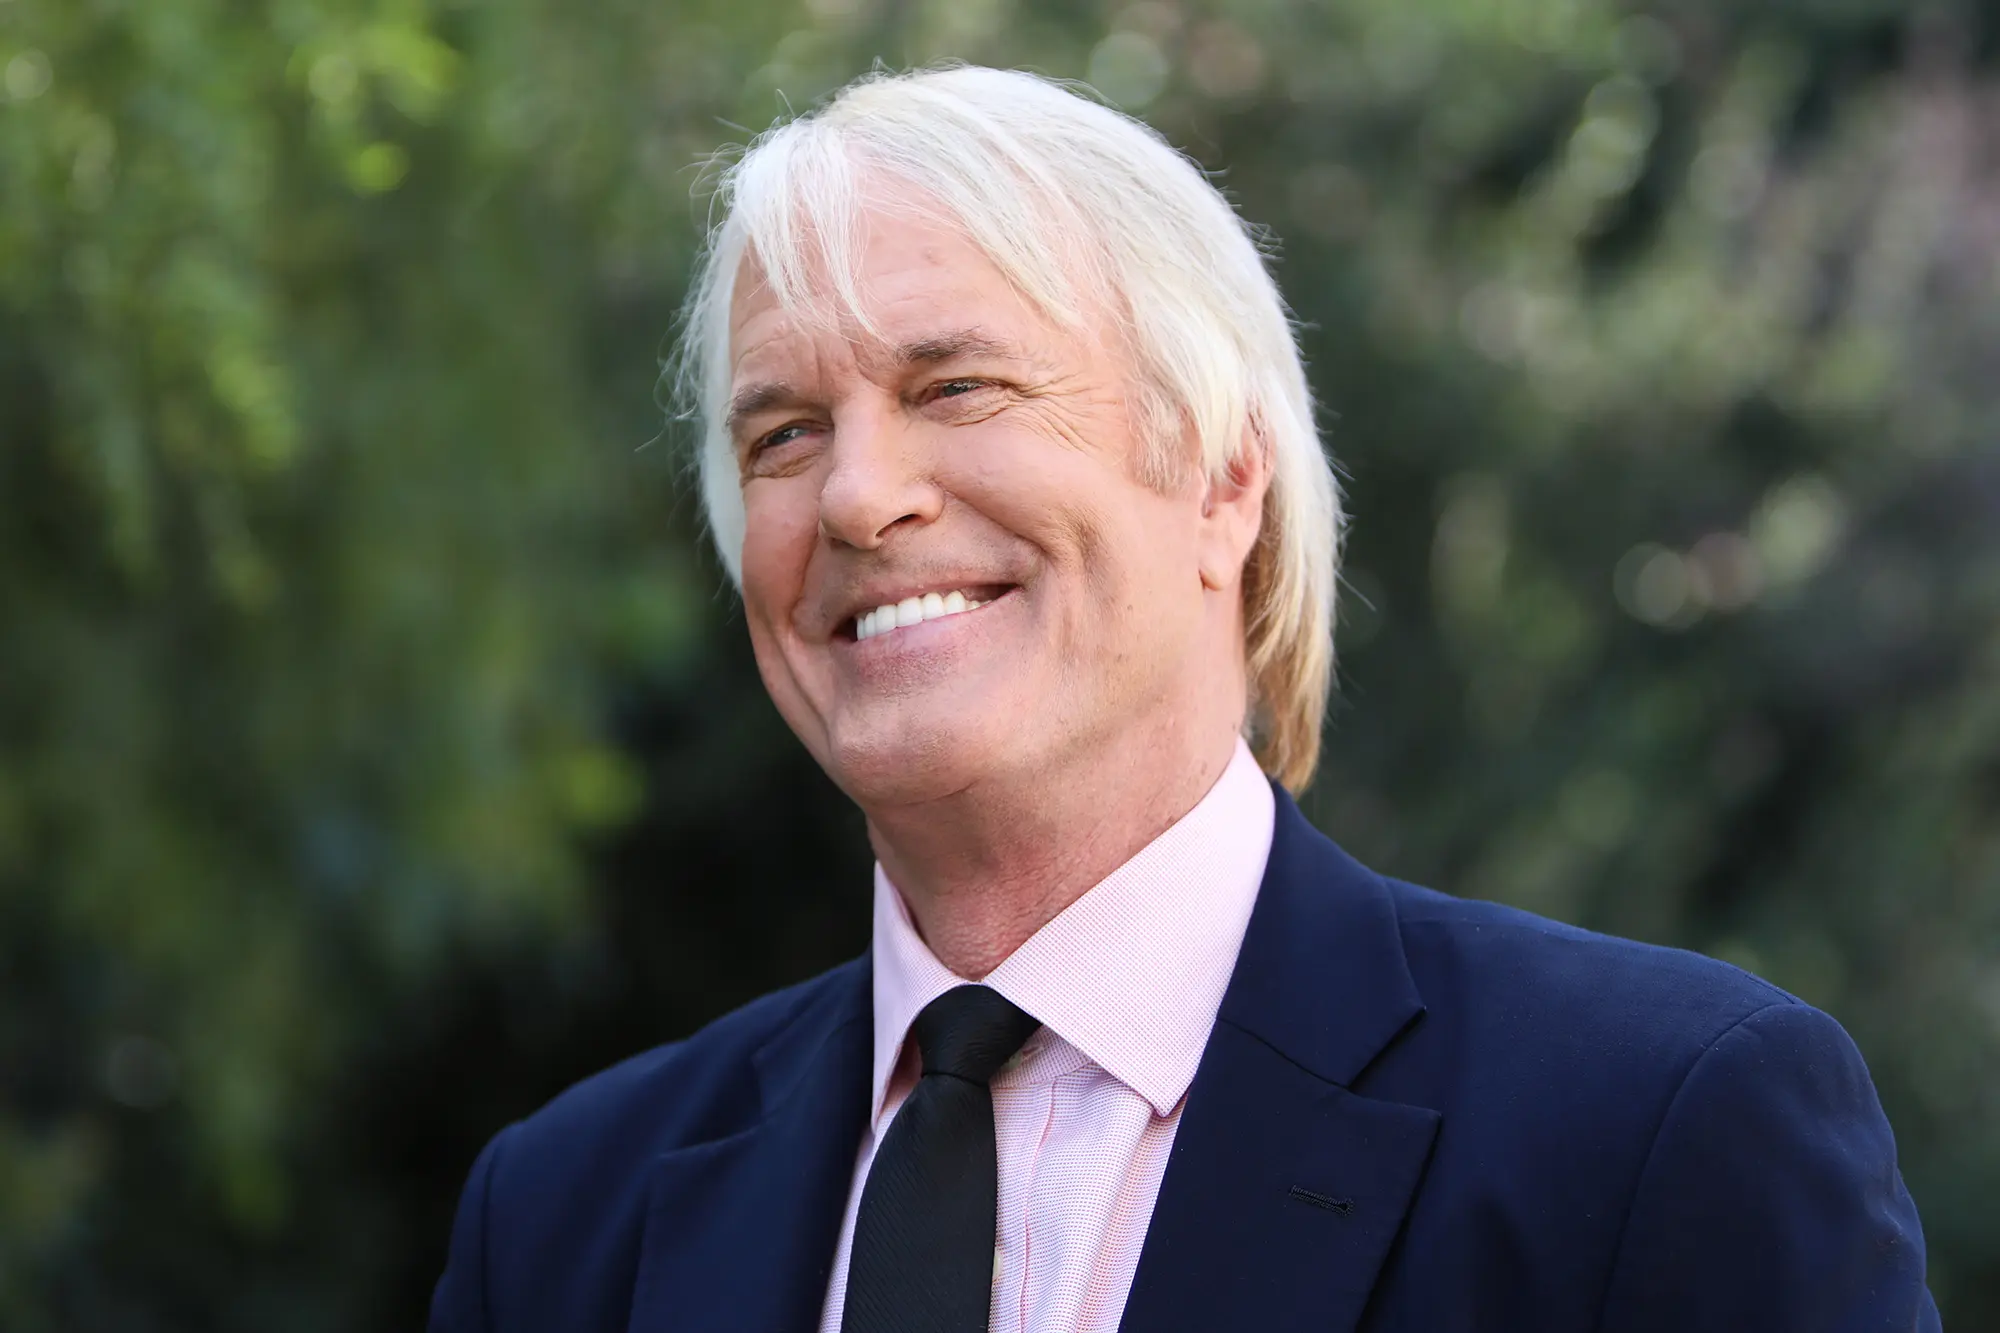 23-captivating-facts-about-john-tesh